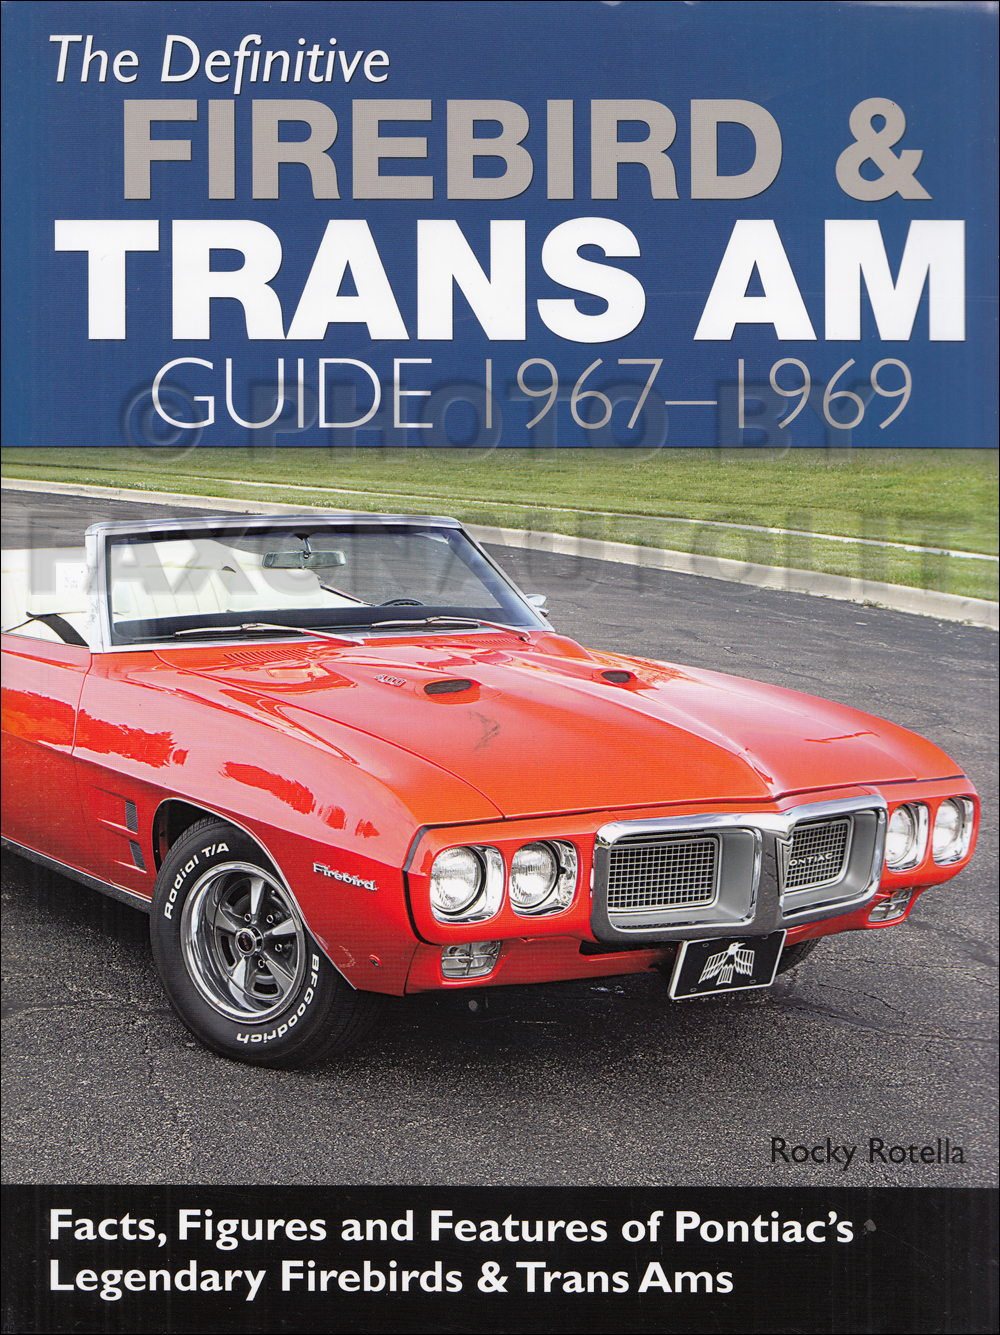 1967-1969 Definitive Firebird & Trans Am Guide: Facts, Figures and Features